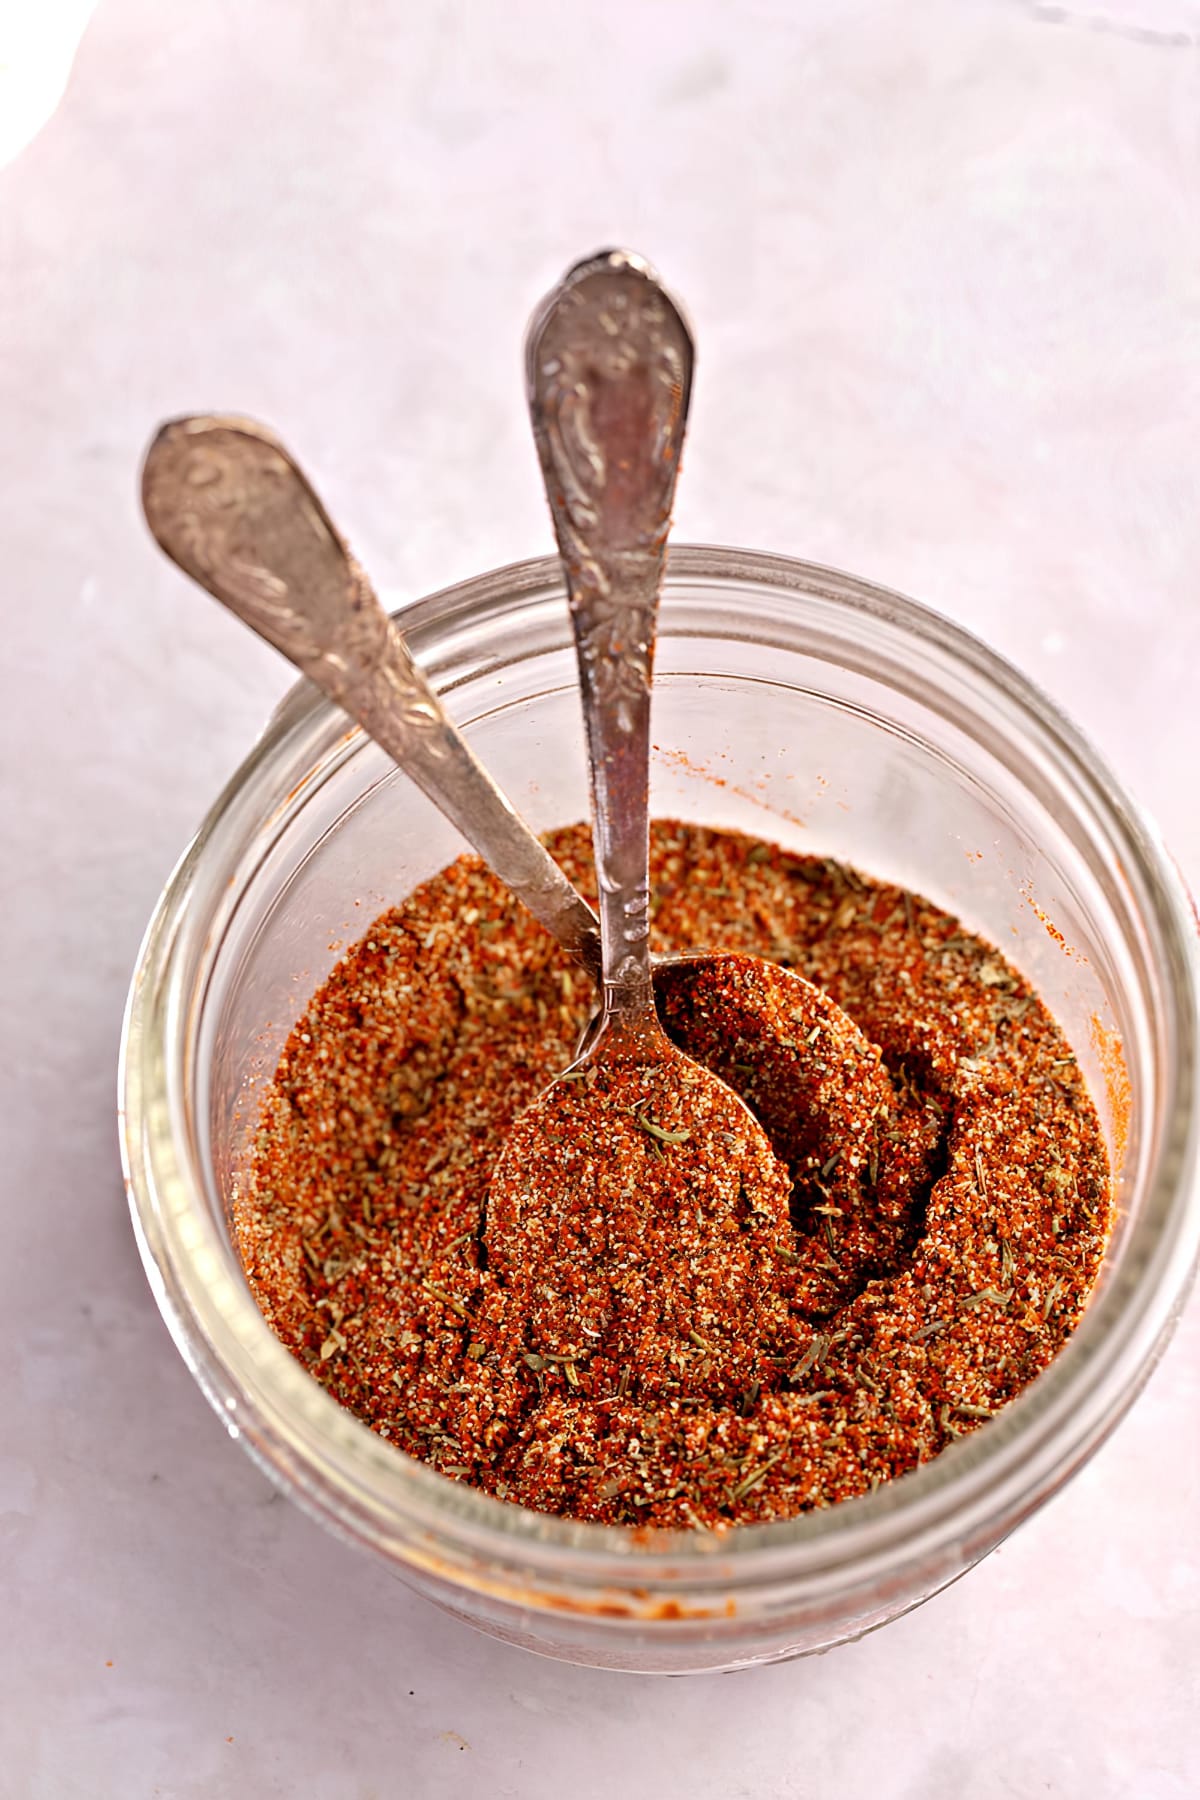 Raw Organic Blackened Seasoning in a Glass Jar with Two Spoons